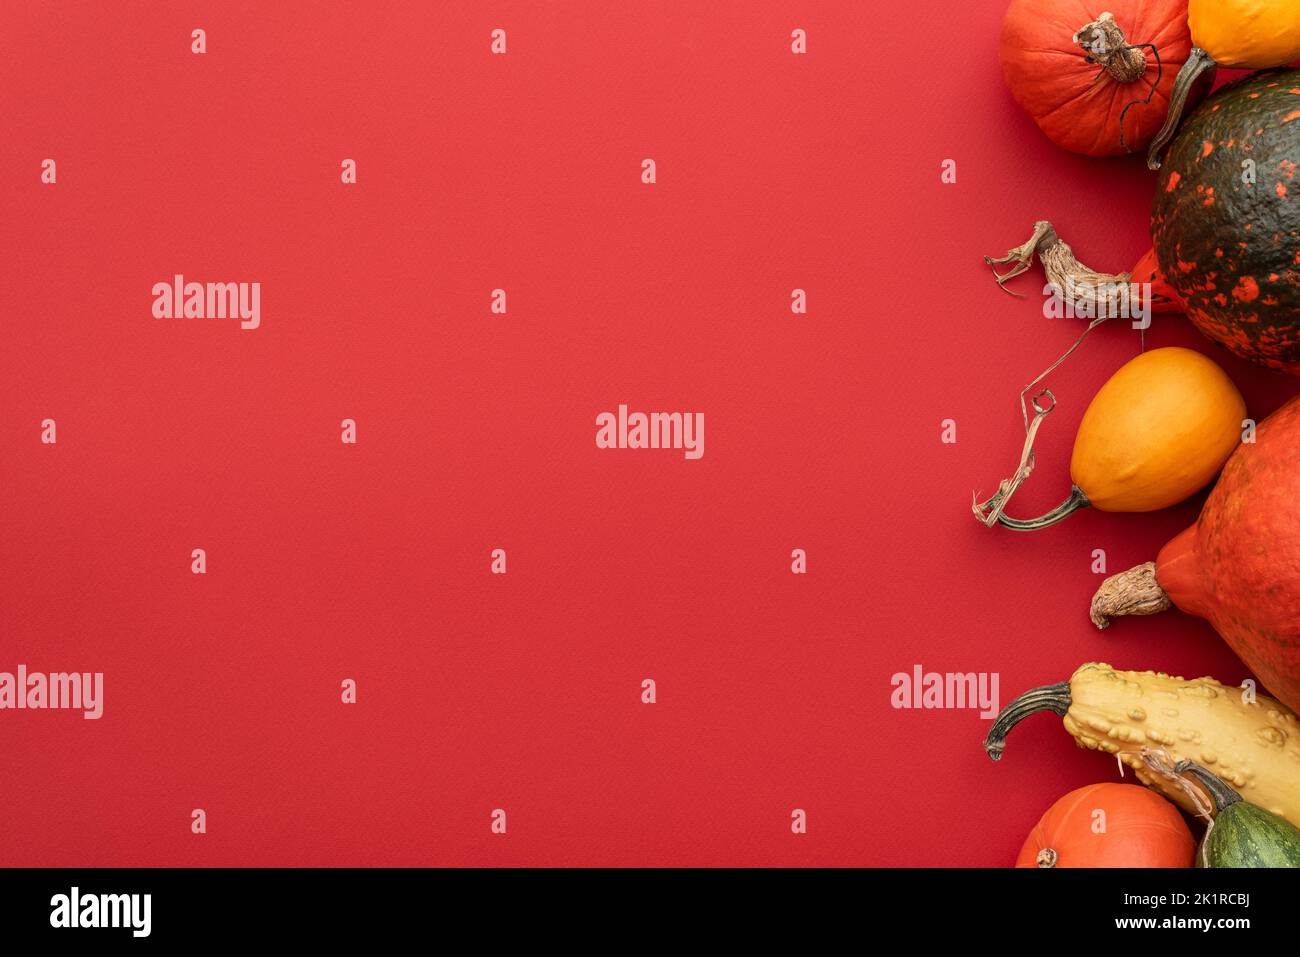 Pumpkins and decorative gourds on red background witn copy space for text Stock Photo